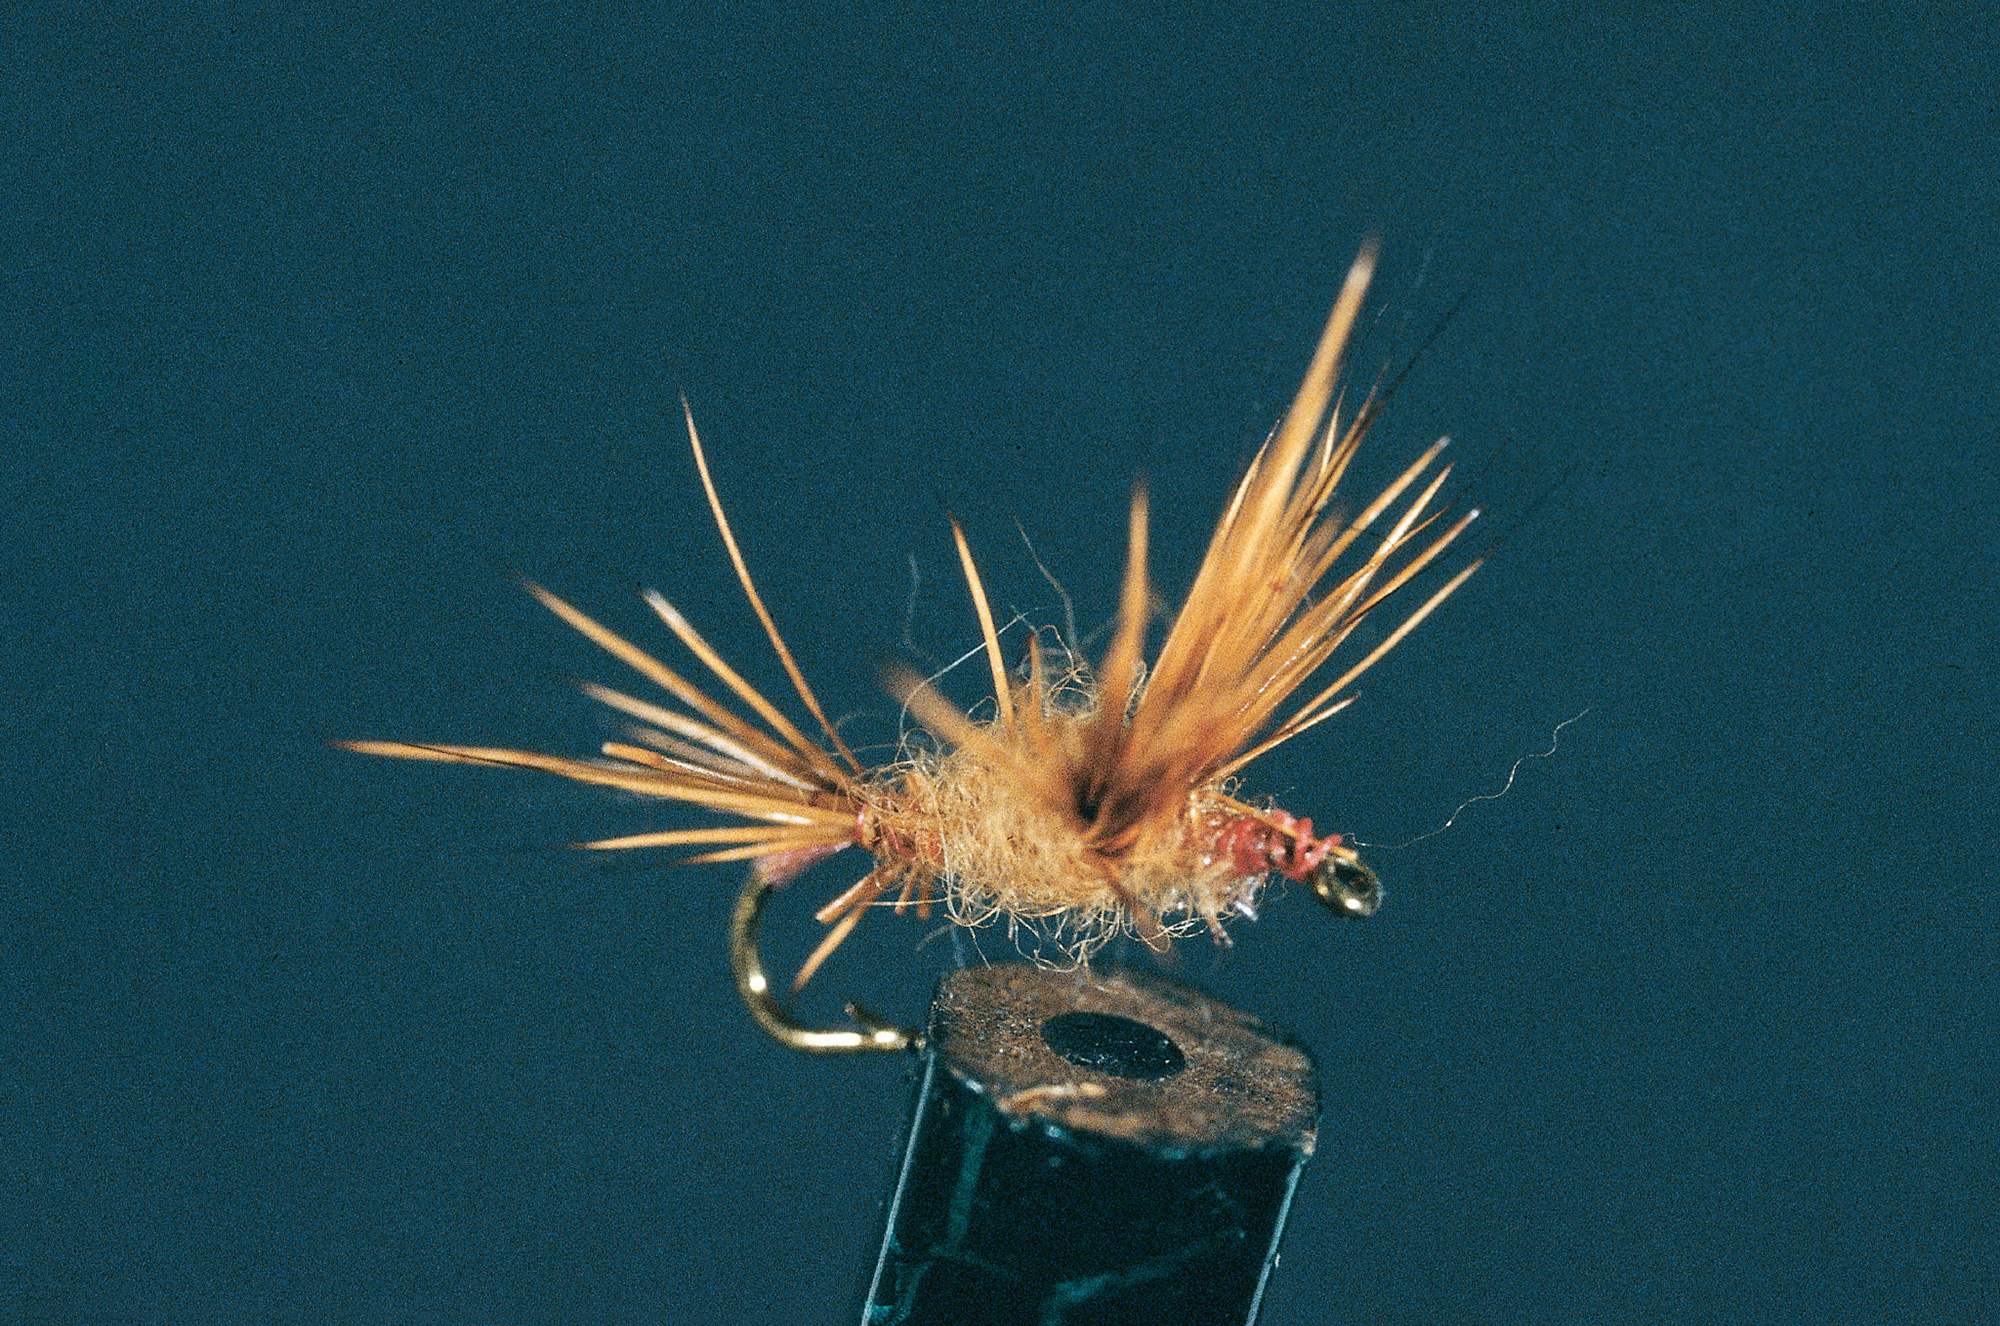 A photograph of the Haystack fly, made by Fran Betters.